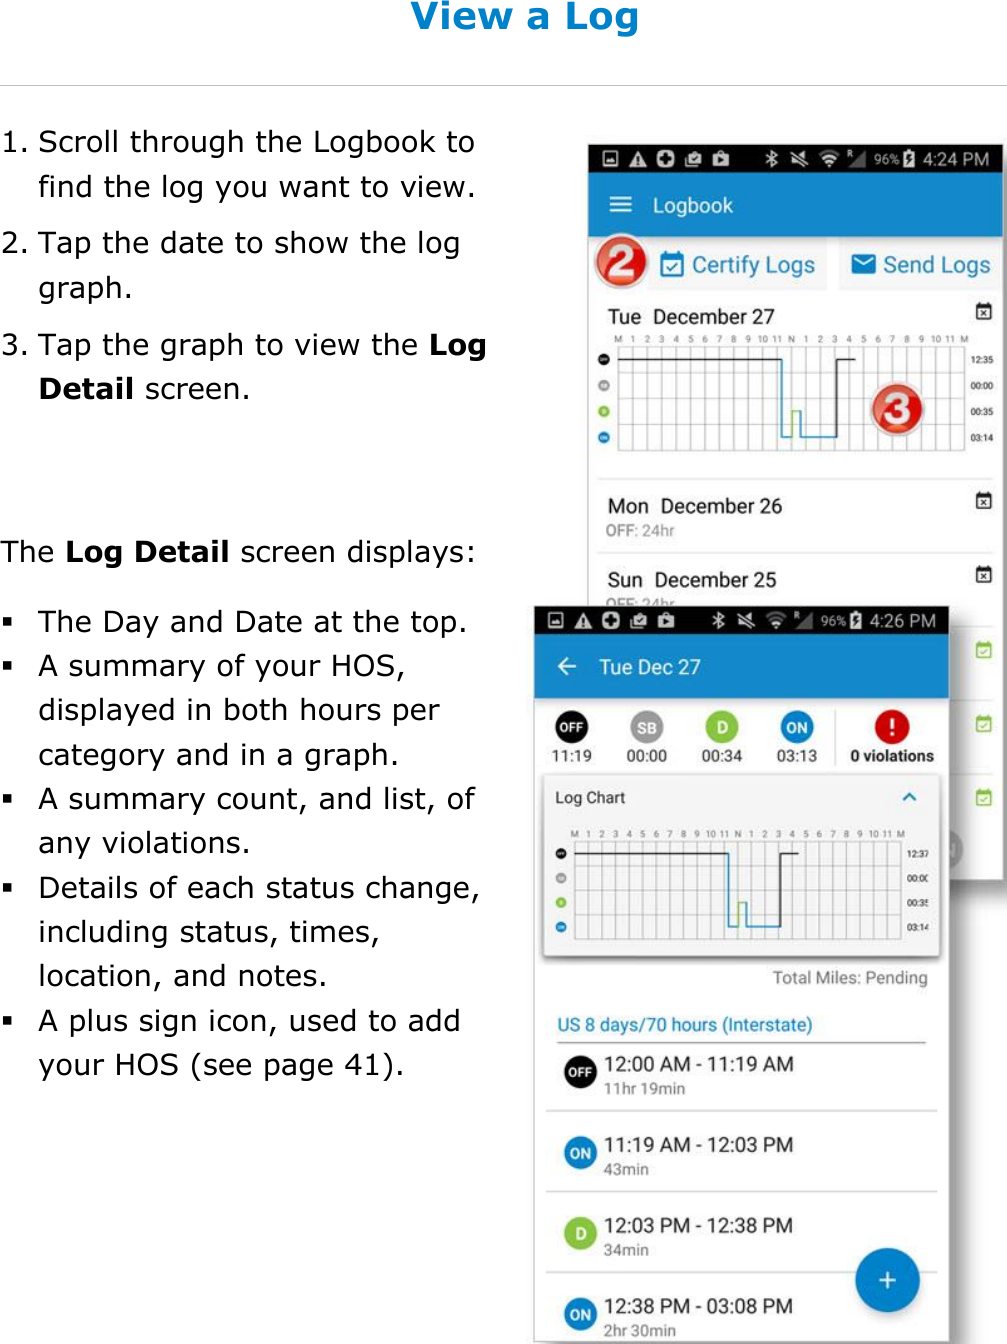 Manage My Logbook DriverConnect User Guide  40 © 2017, Rand McNally, Inc. View a Log 1. Scroll through the Logbook to find the log you want to view. 2. Tap the date to show the log graph. 3. Tap the graph to view the Log Detail screen.  The Log Detail screen displays:  The Day and Date at the top.  A summary of your HOS, displayed in both hours per category and in a graph.  A summary count, and list, of any violations.  Details of each status change, including status, times, location, and notes.  A plus sign icon, used to add your HOS (see page 41).    